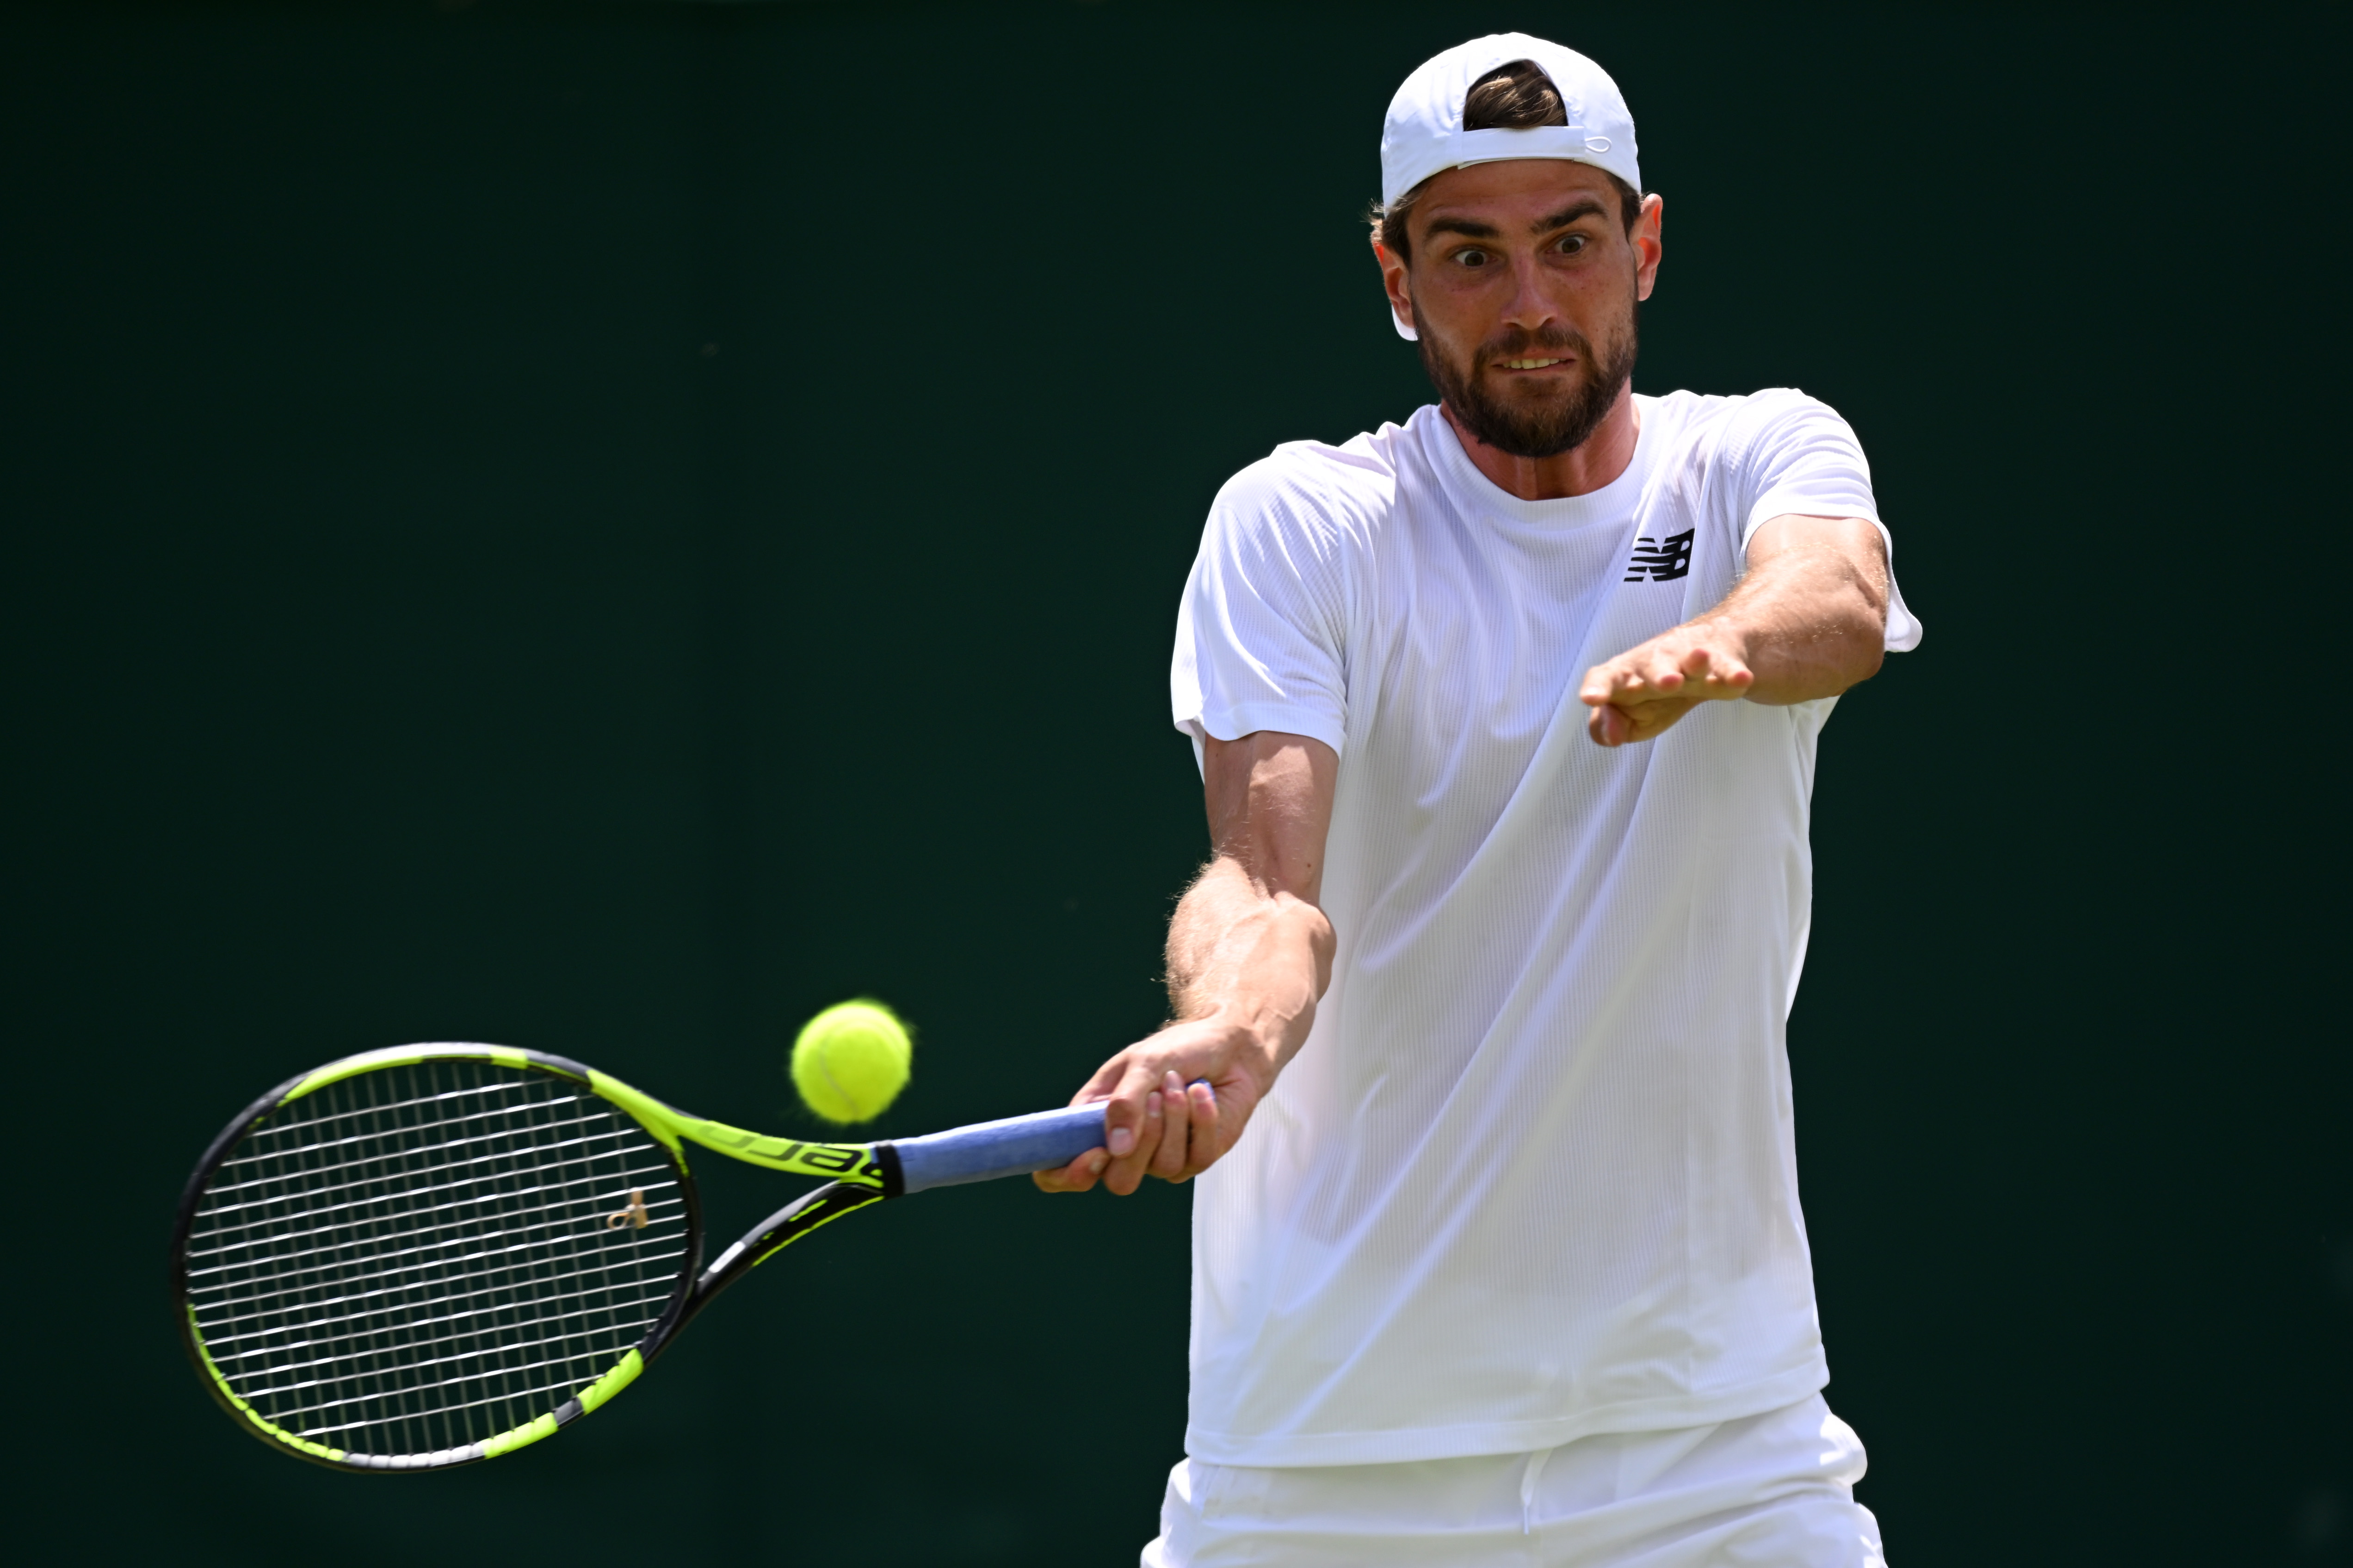 Maxime Cressy edges Alexander Bublik on grass for first ATP title in Newport